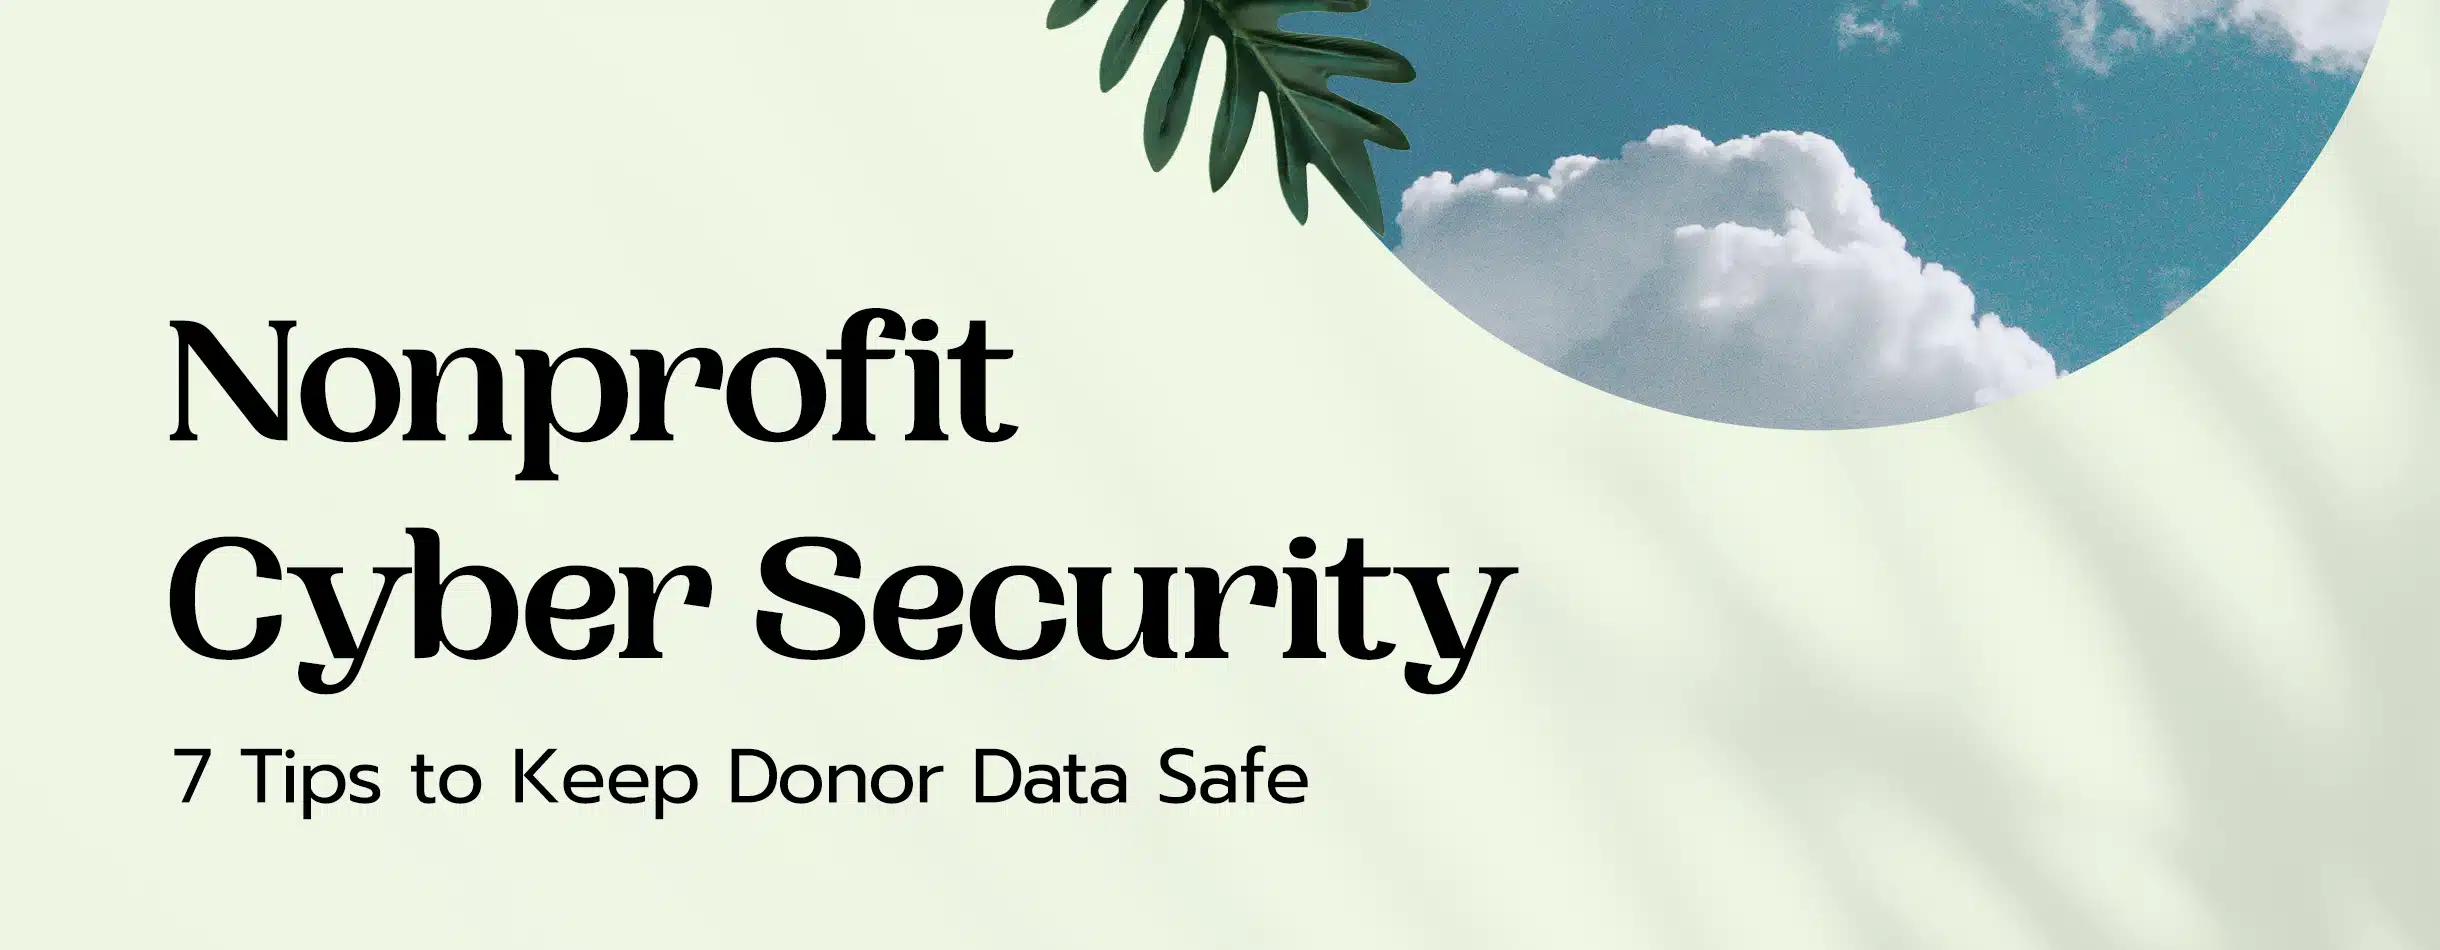 A green background is shown with a circular shape in the top right. In it is a blue sky with clouds. The words "Nonprofit Cyber Security: 7 Tips to Keep Donor Data Safe" is shown.